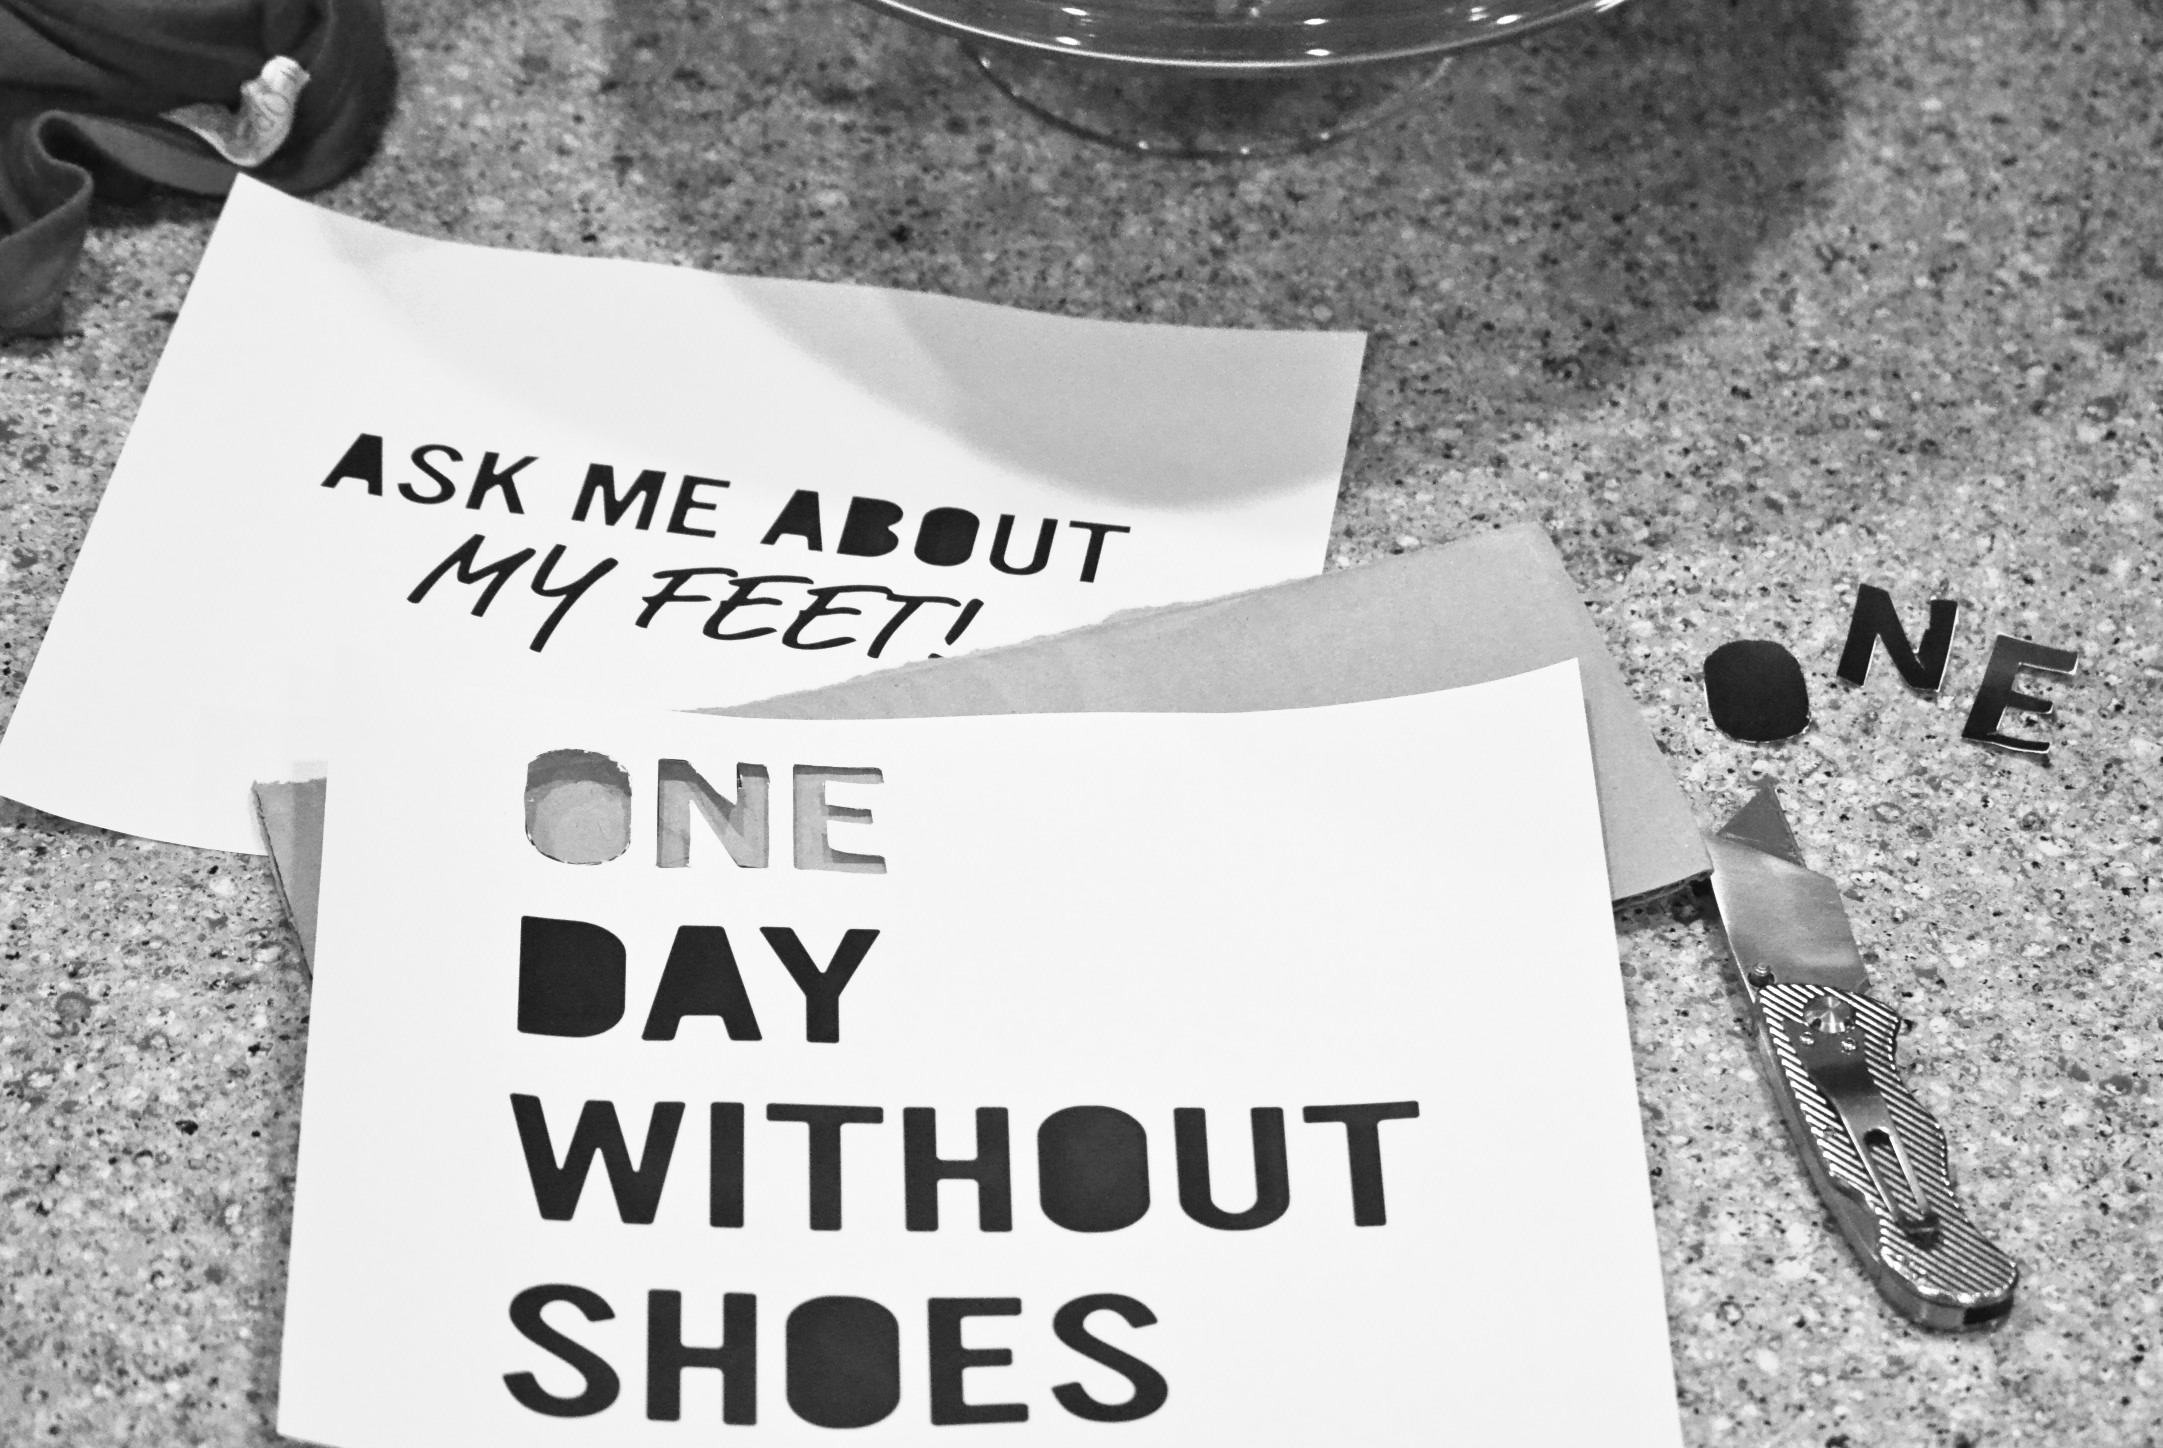 One day without shoes